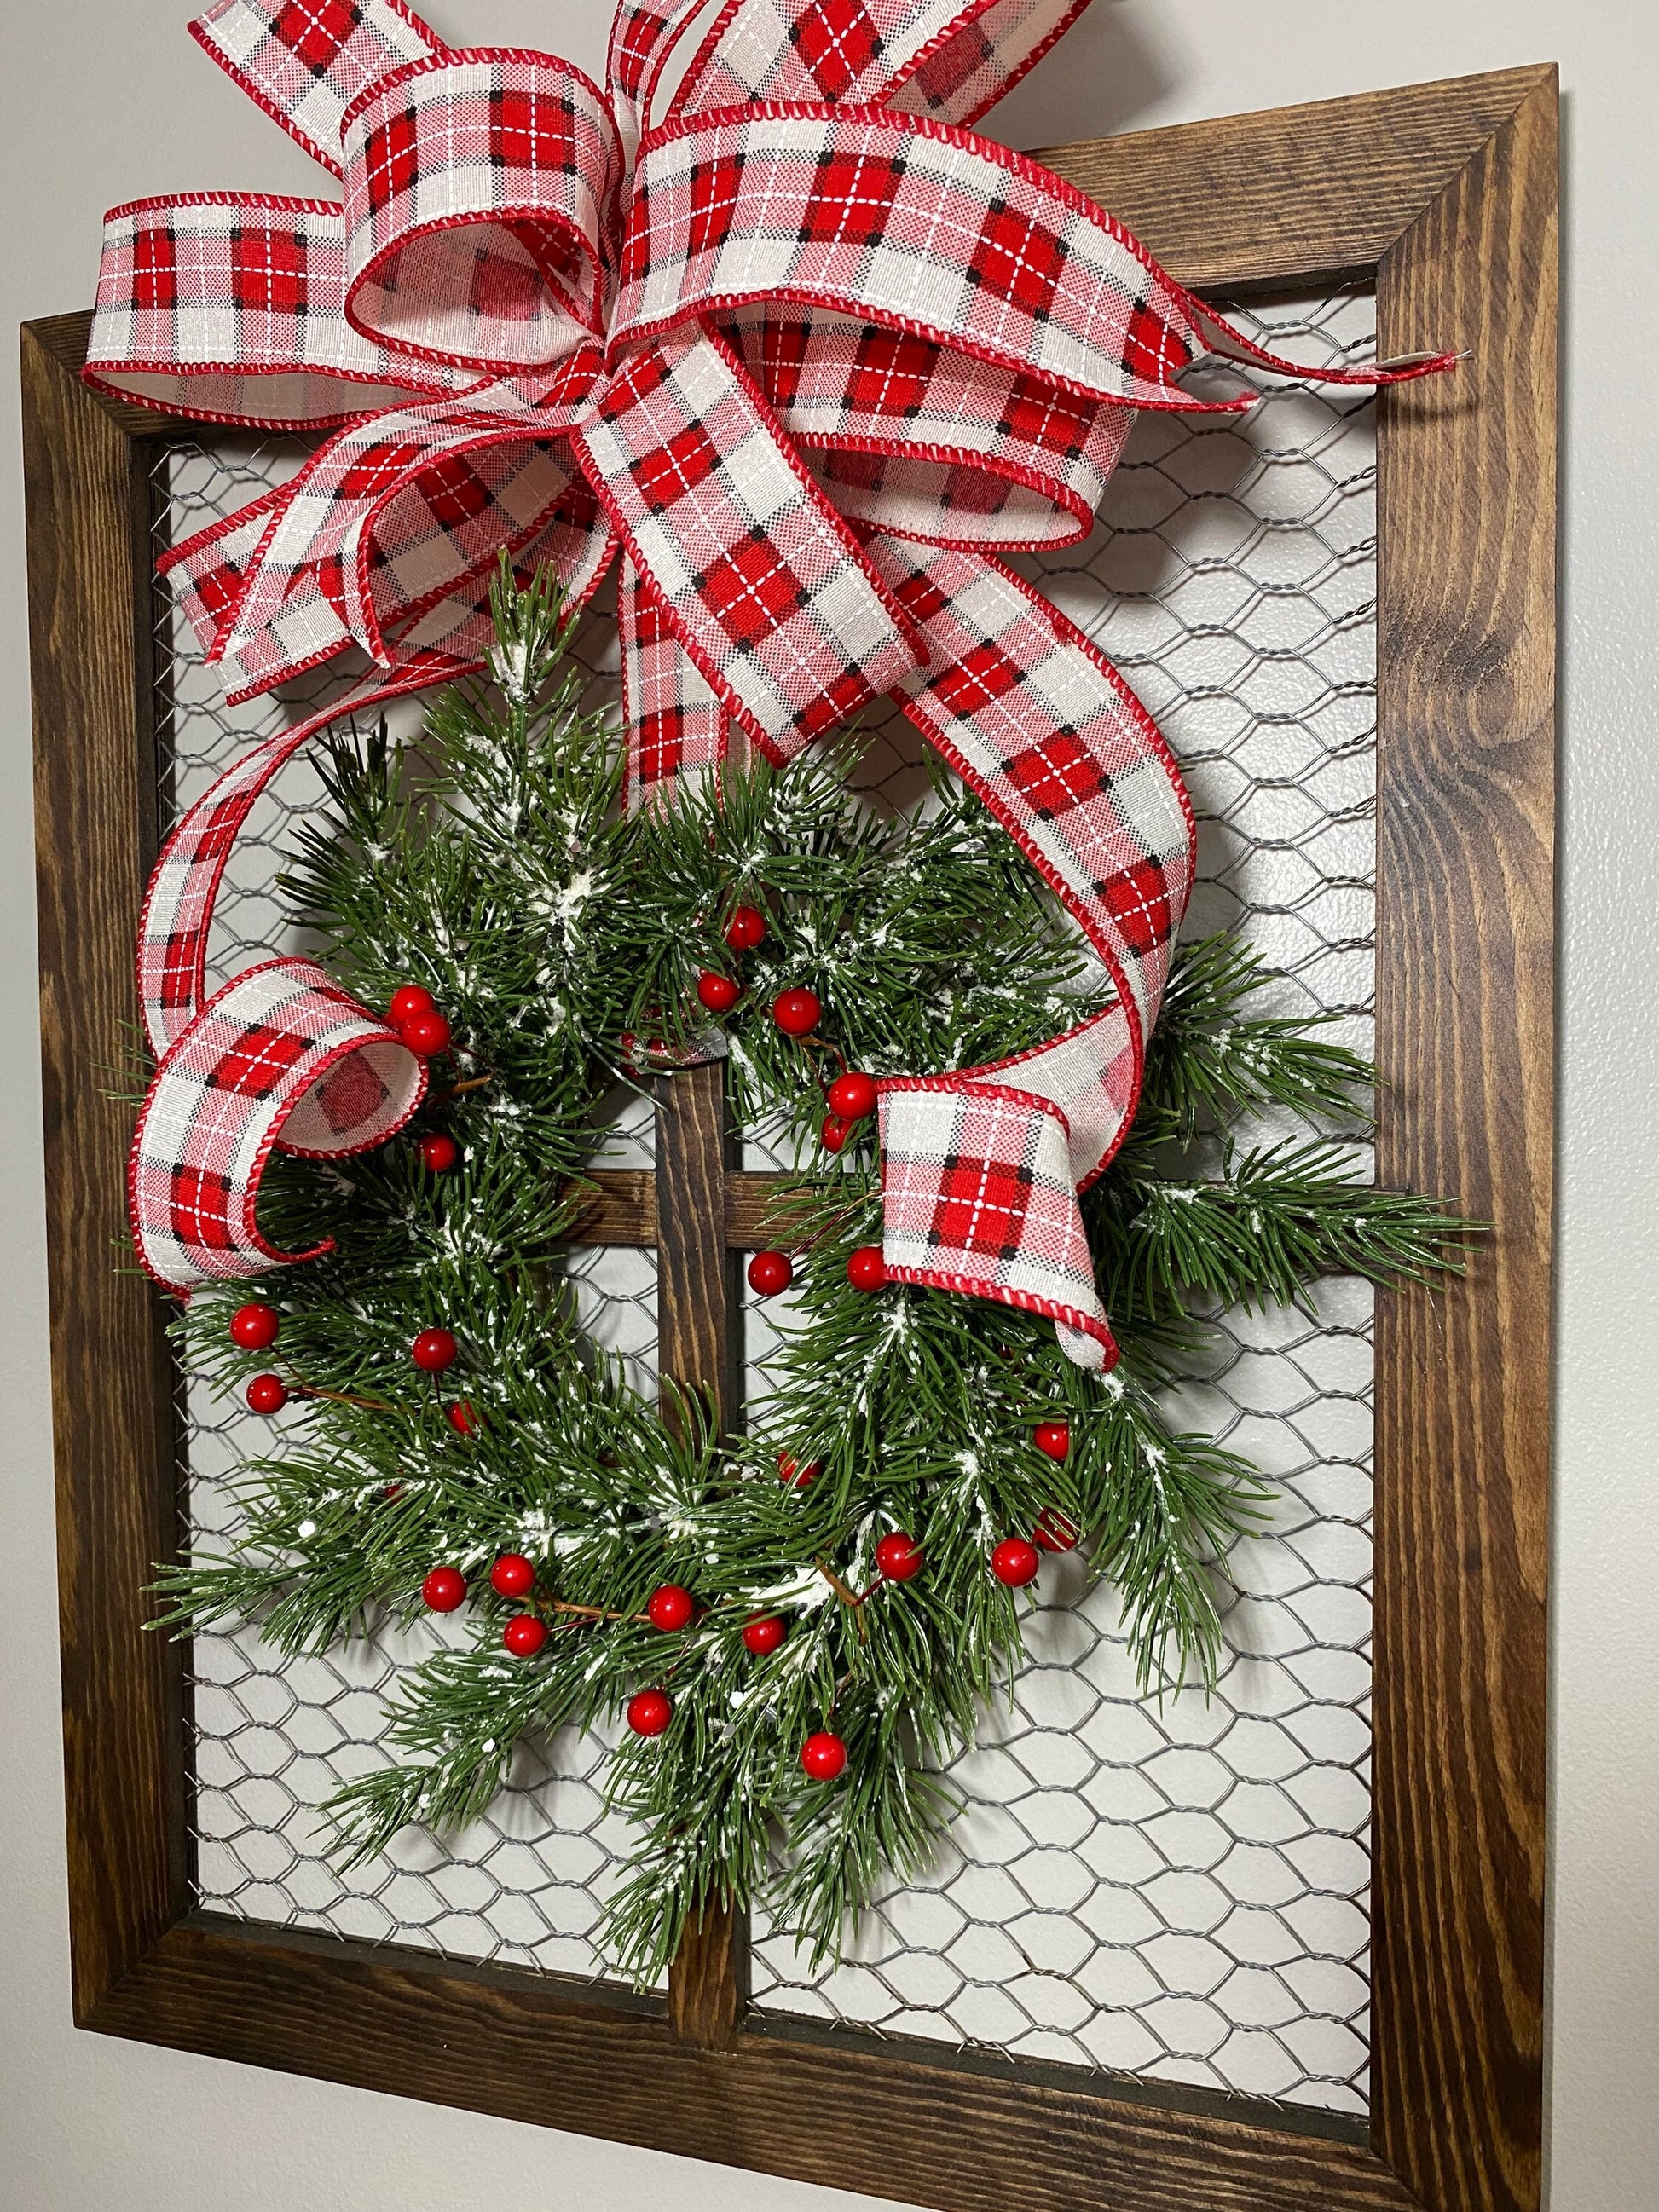 Chicken Wire Window with Christmas Wreath, Christmas Mantel Sitter, Xmas Gallery Wall Decor, Wood Frame with Wreath